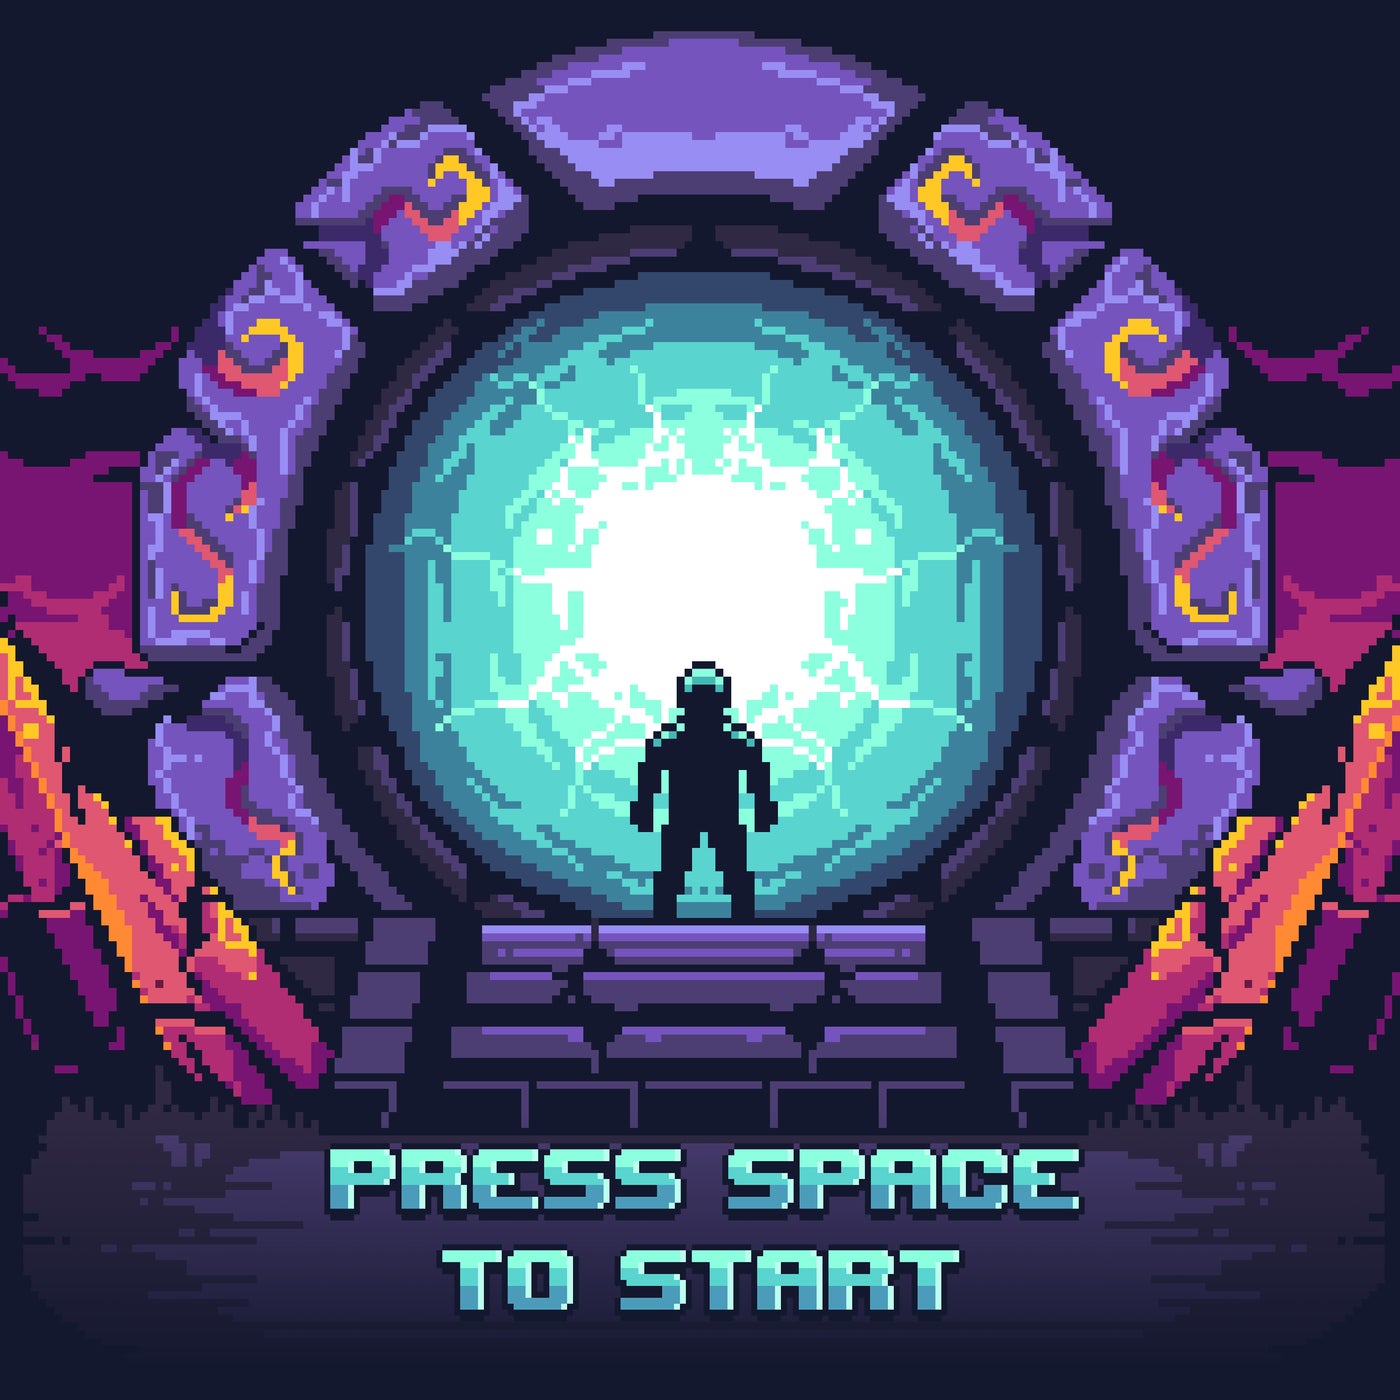 PRESS SPACE TO START